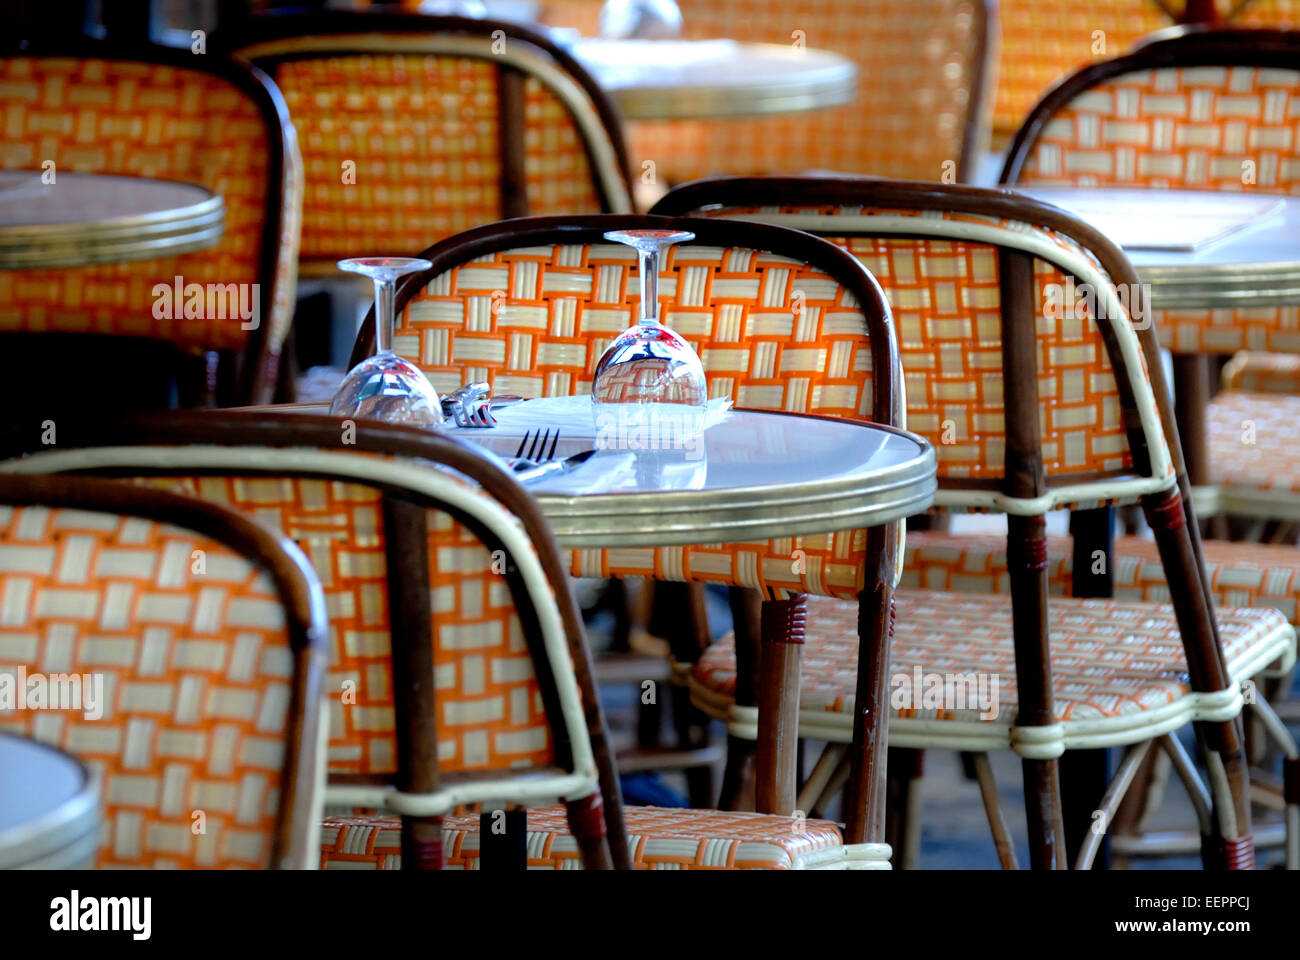 Paris Cafe Table And Chairs Stock Photos Paris Cafe Table And